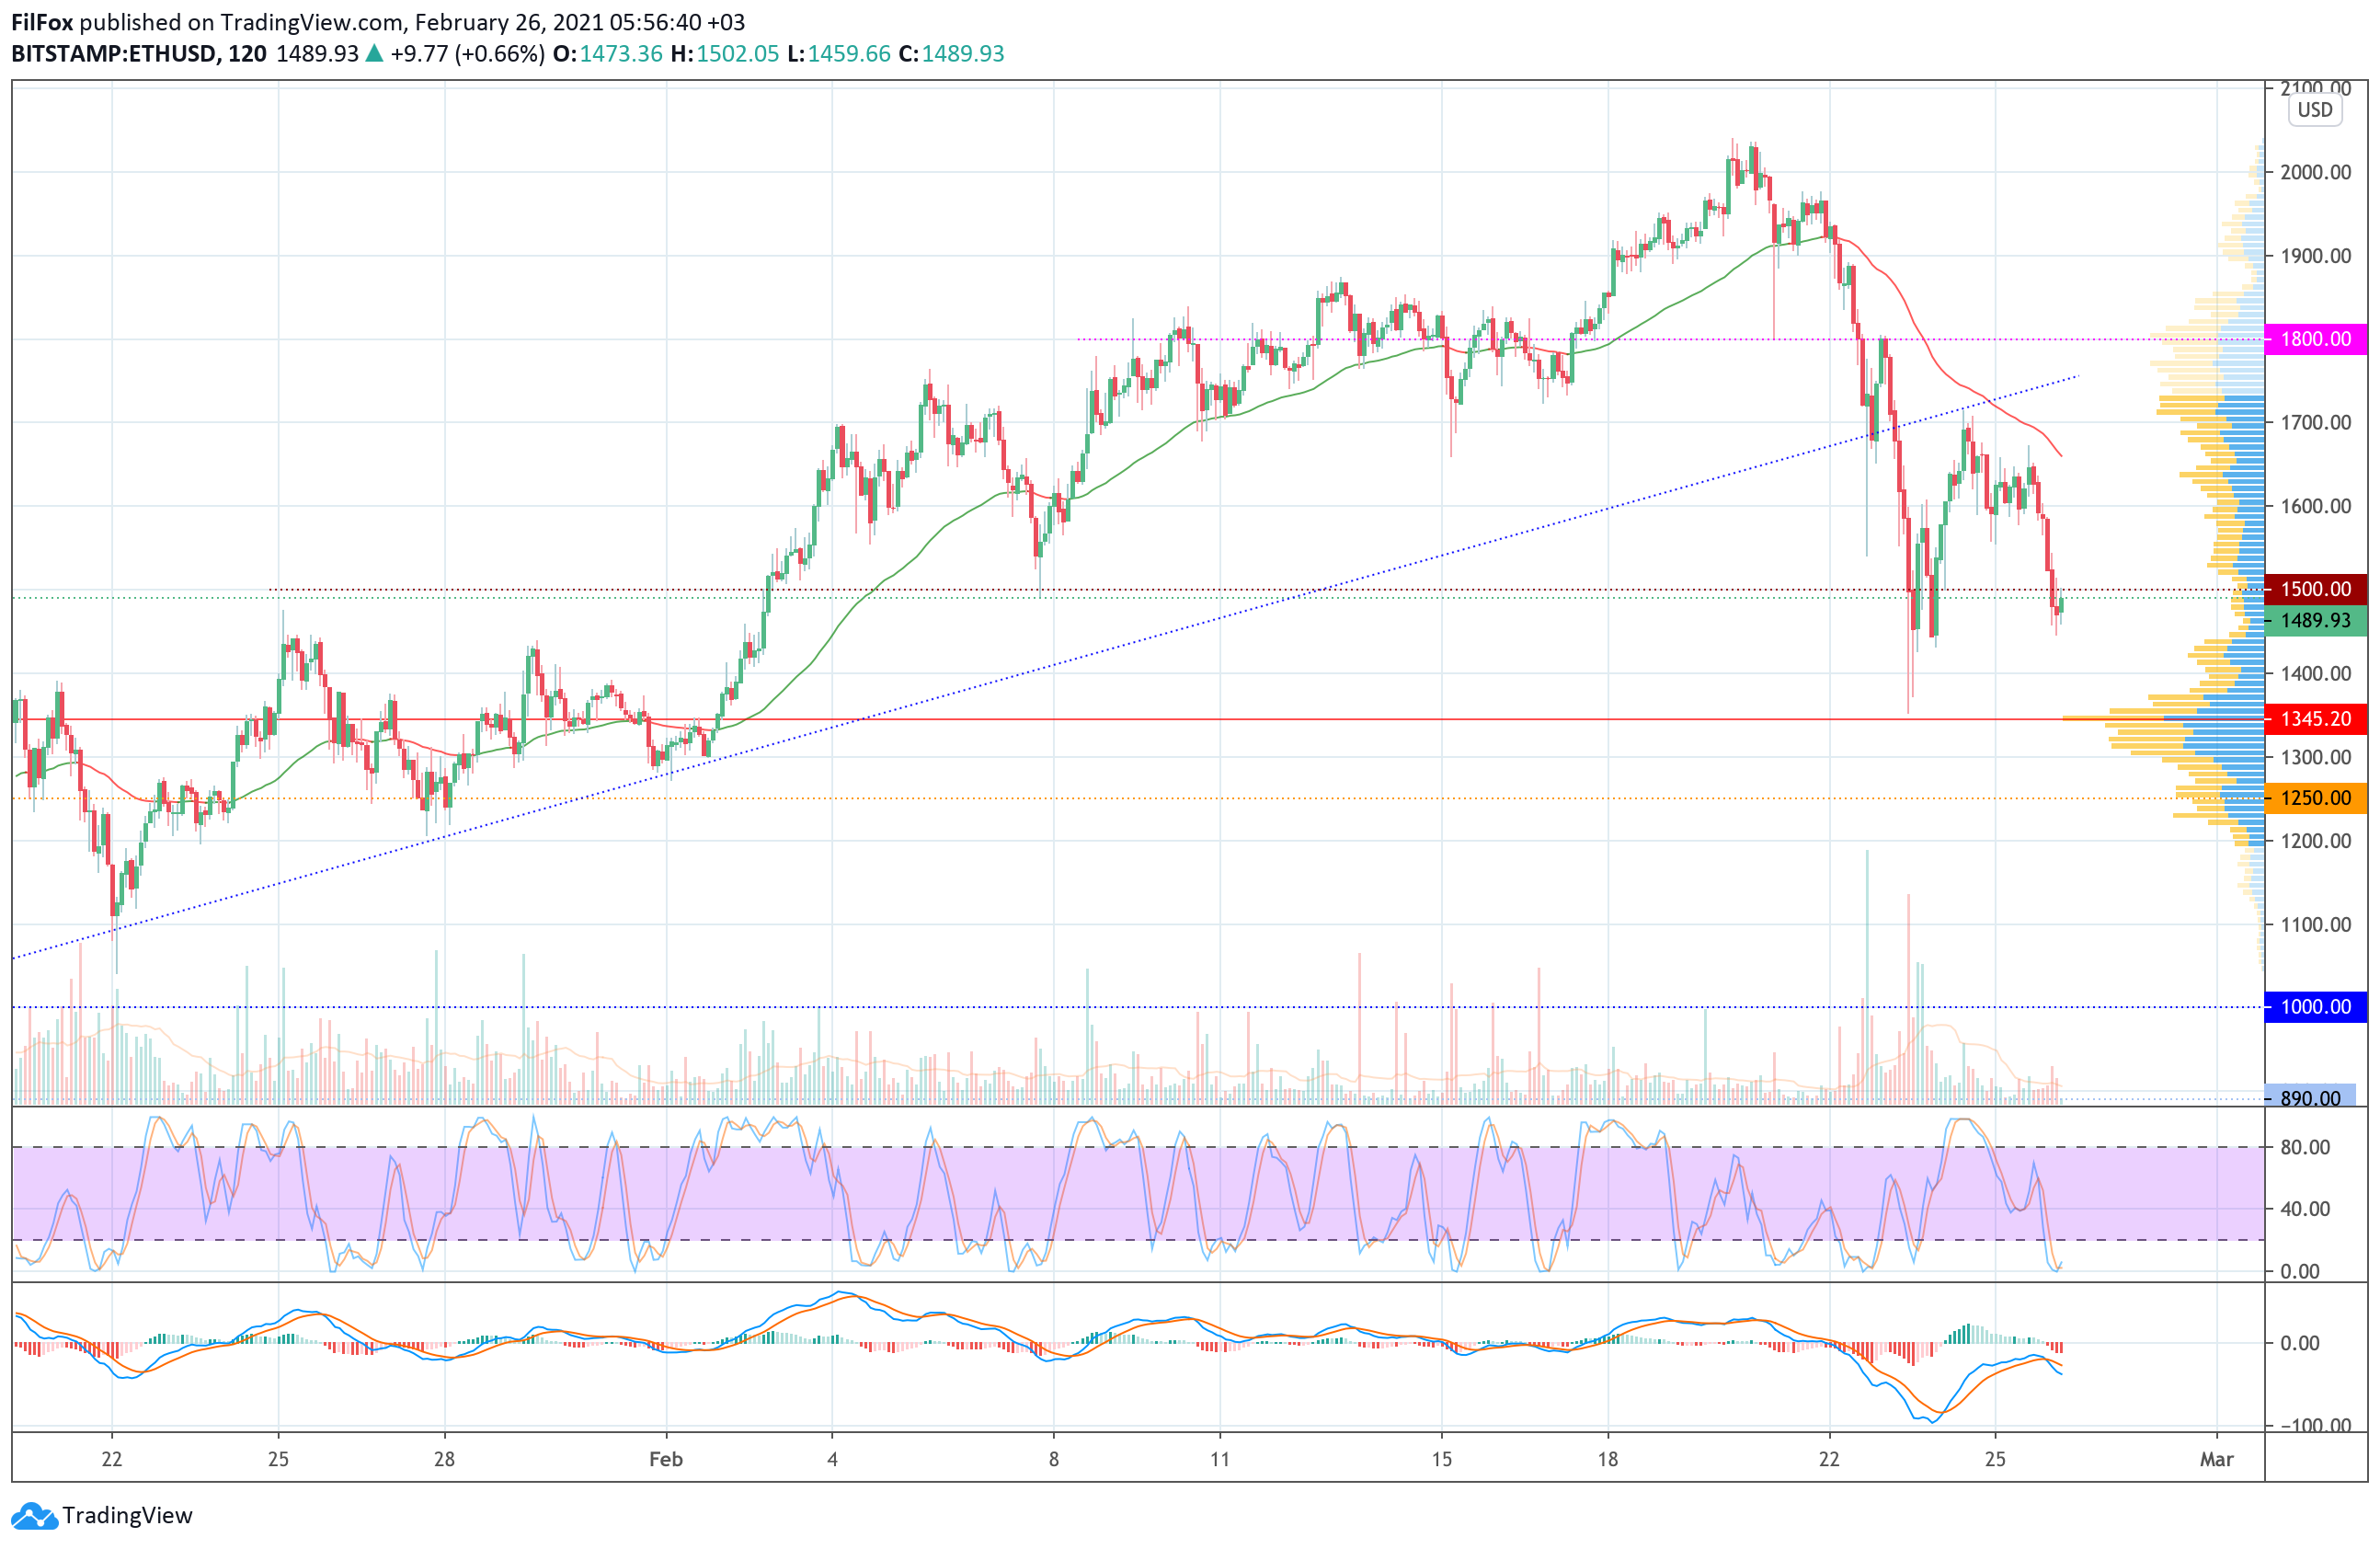 Analysis of prices for Bitcoin, Ethereum, XRP for 02/26/2021